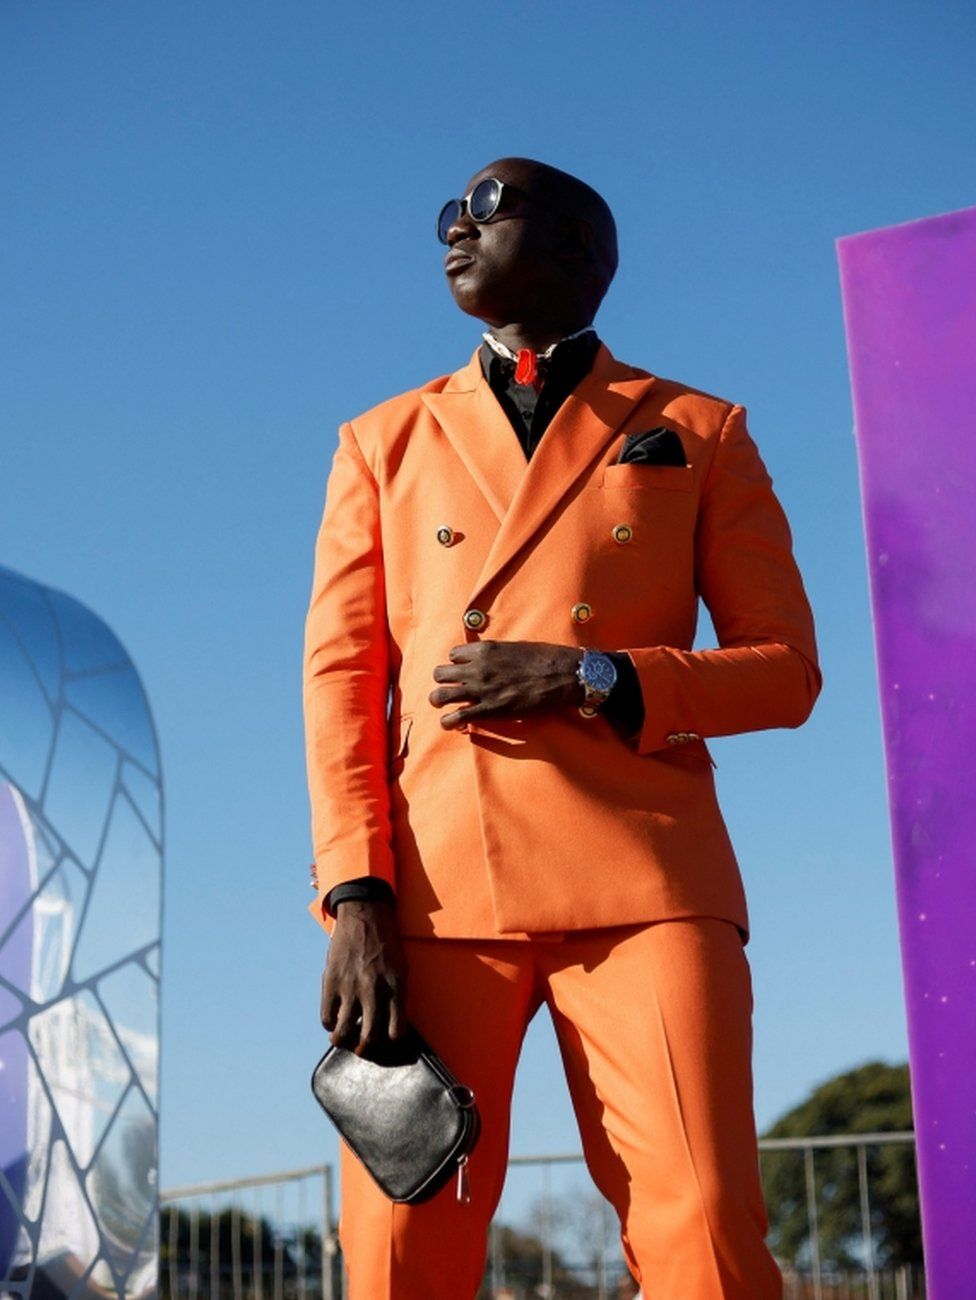 A model poses in an orange suit.